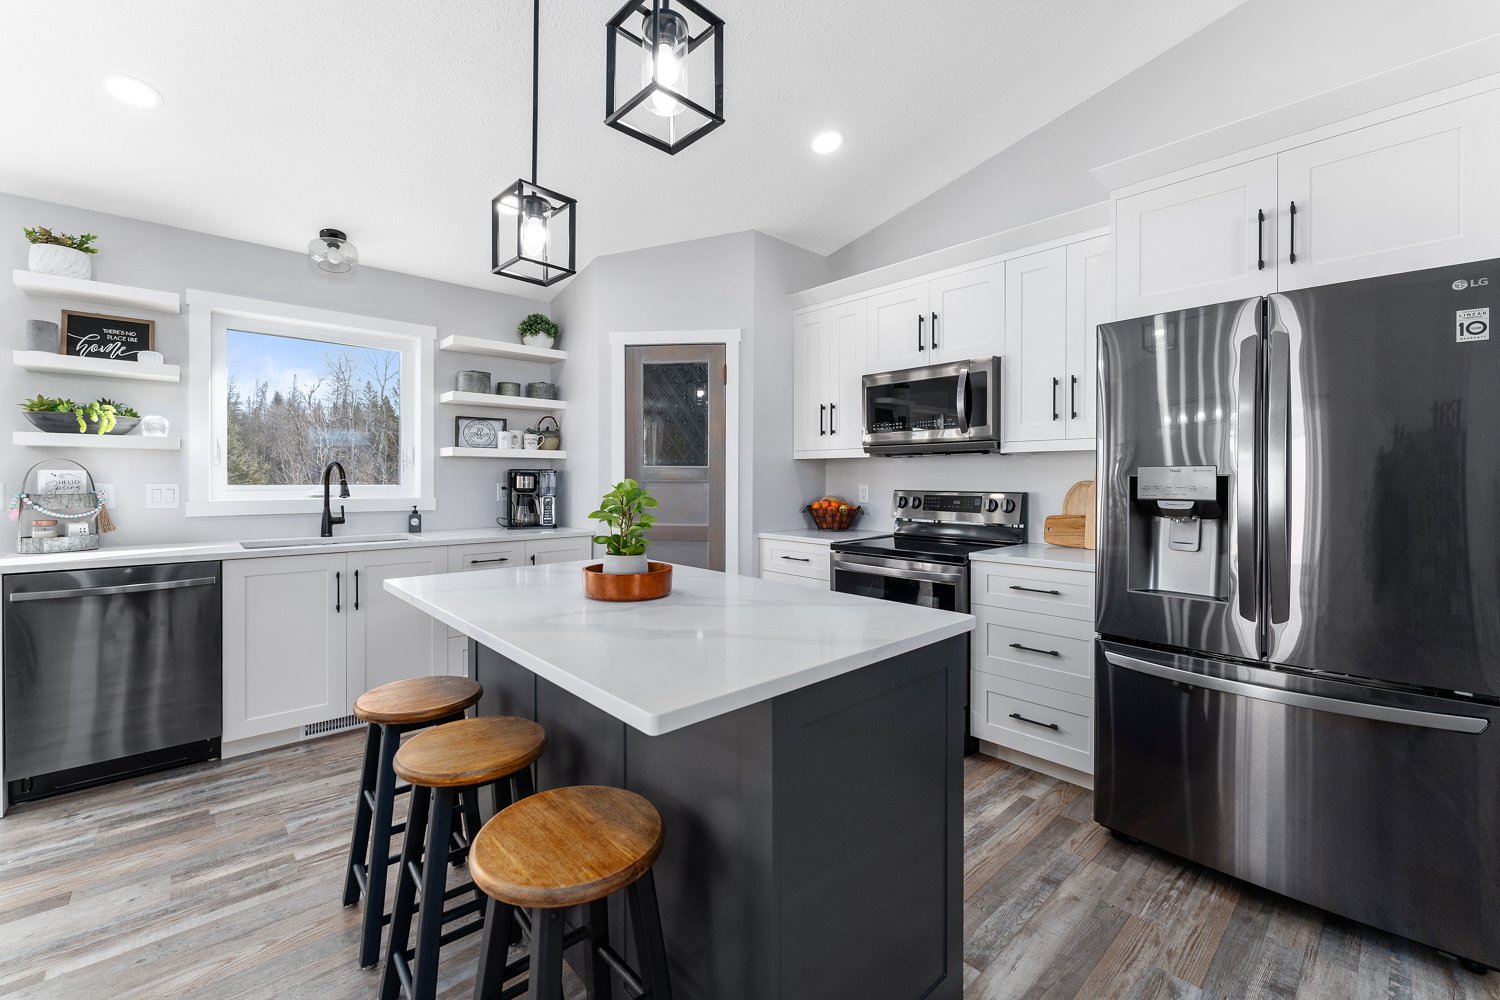 18 Tips for Staying on Budget During Your Kitchen Remodel